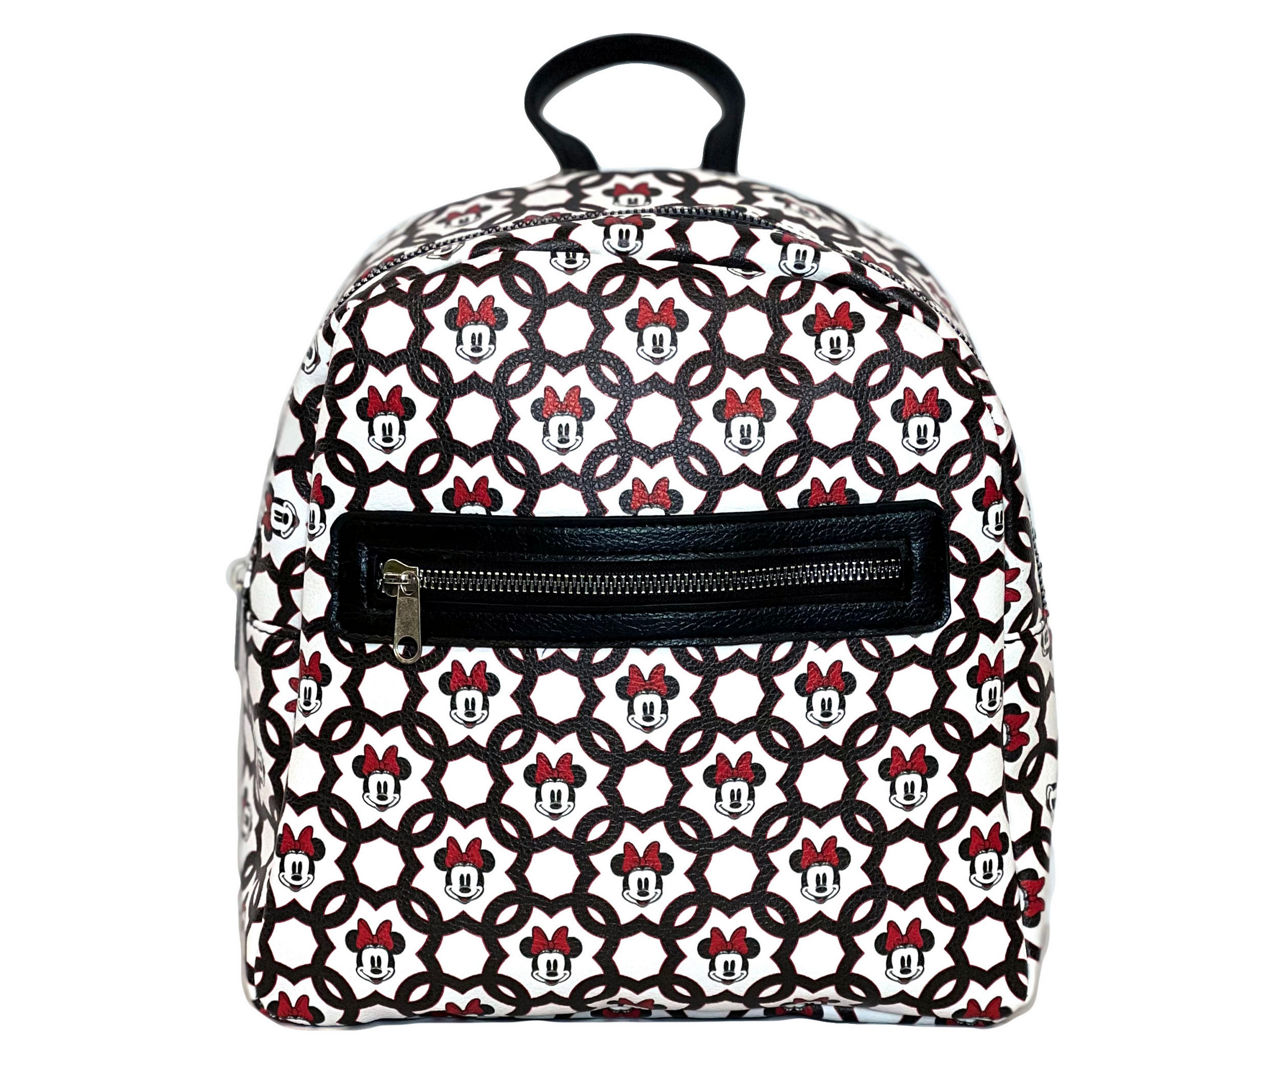 White & Red Minnie Mouse Lattice Faux Leather Backpack | Big Lots